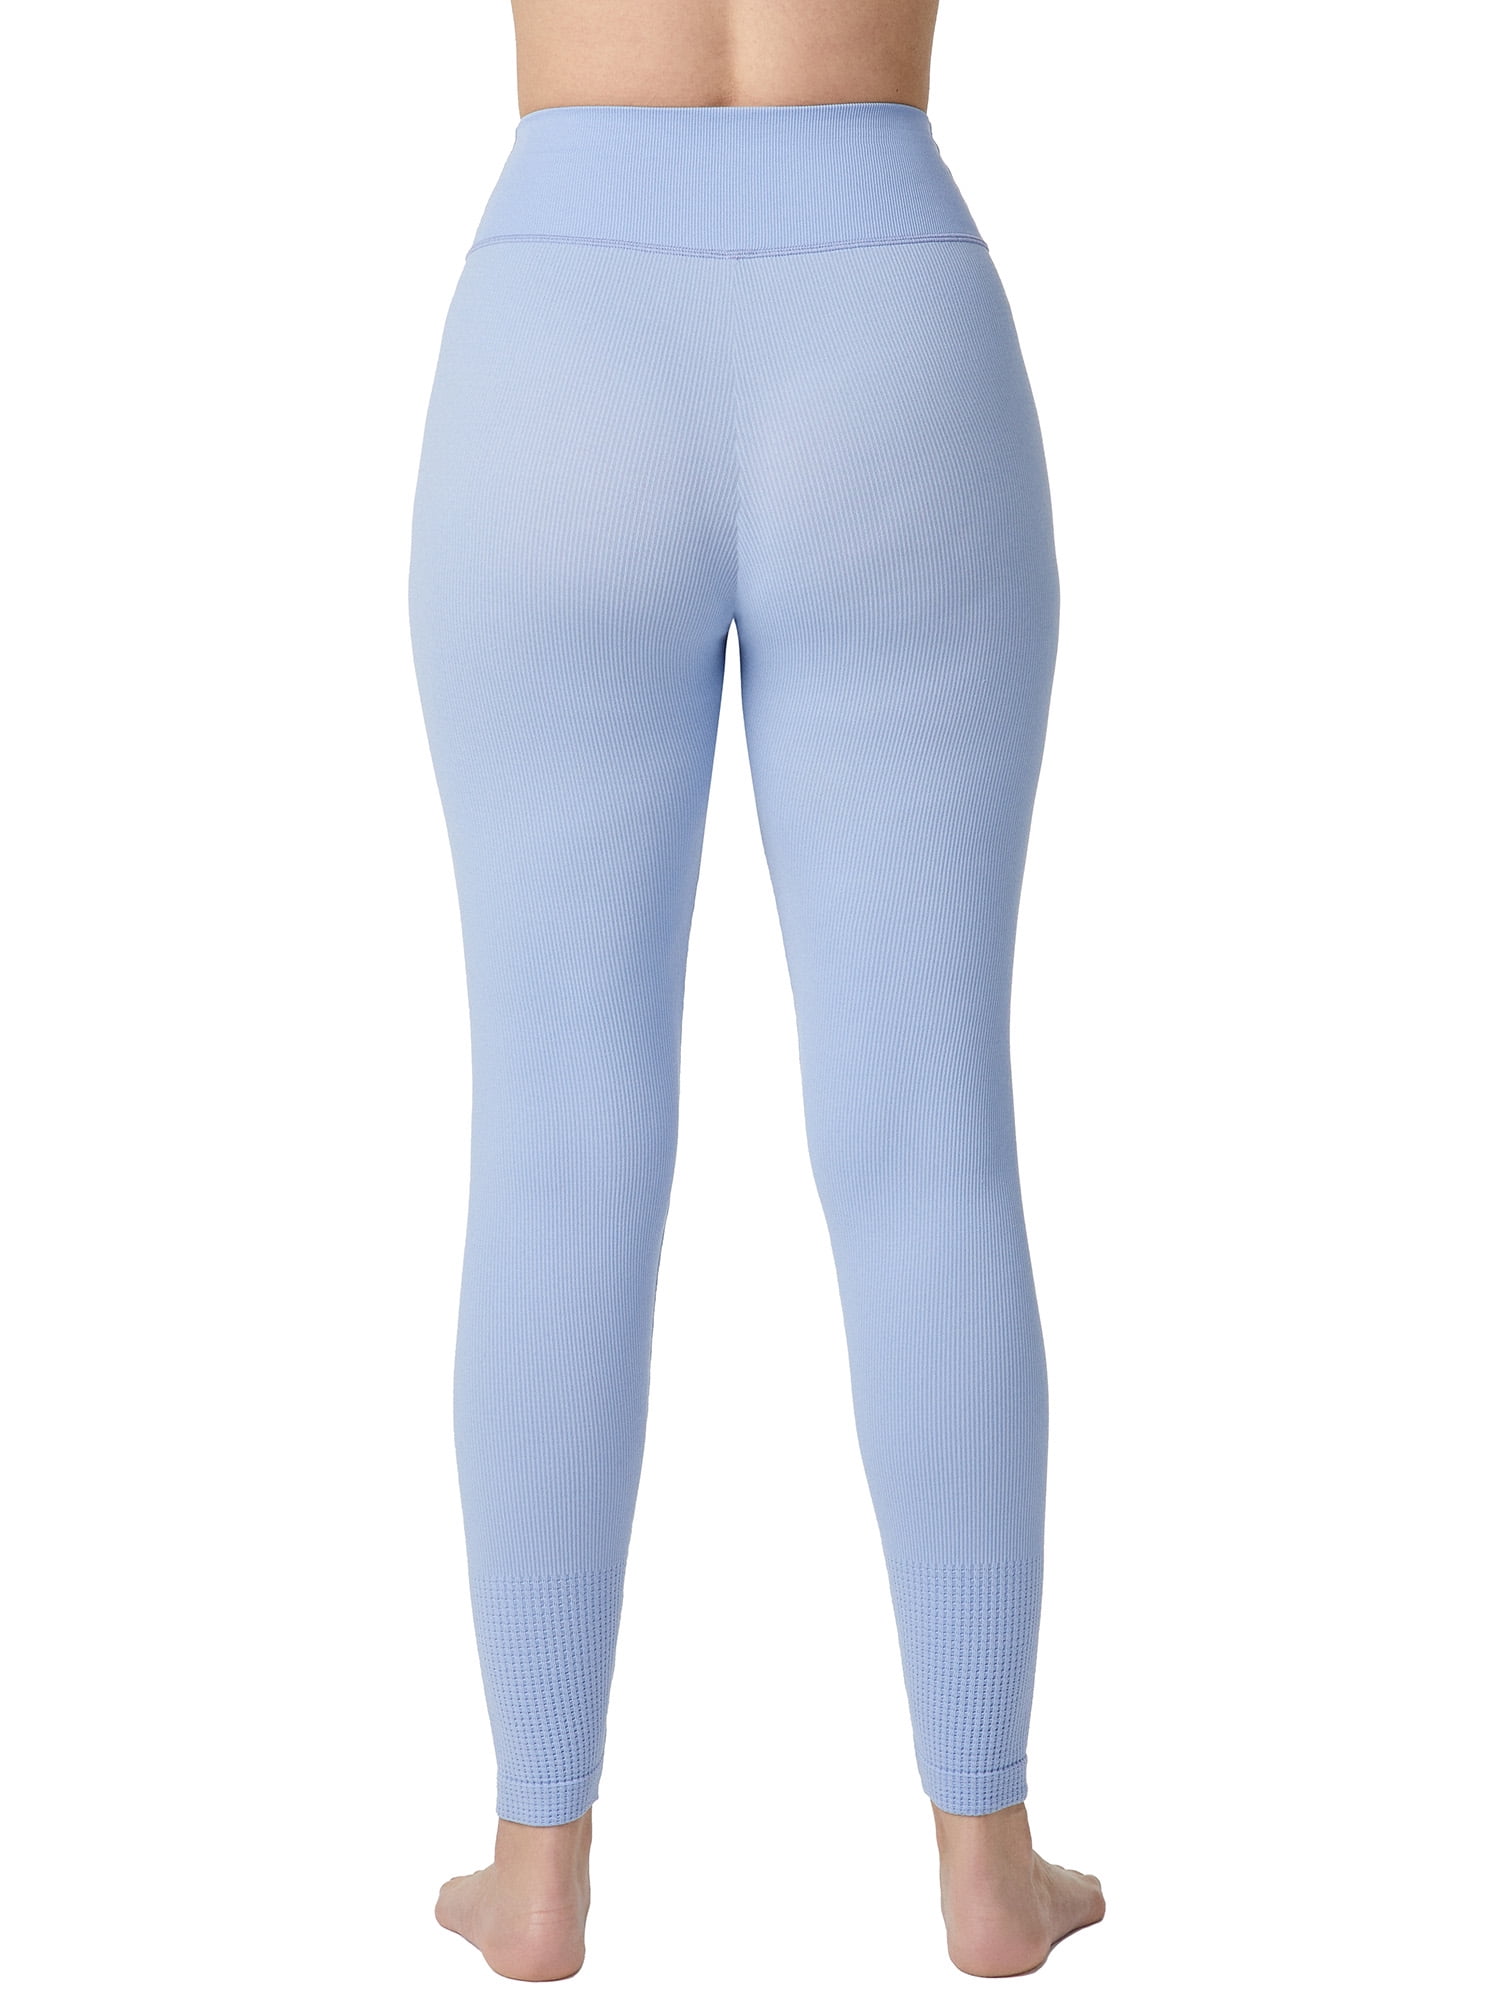 Are Leggings Bad For Your Health? – solowomen